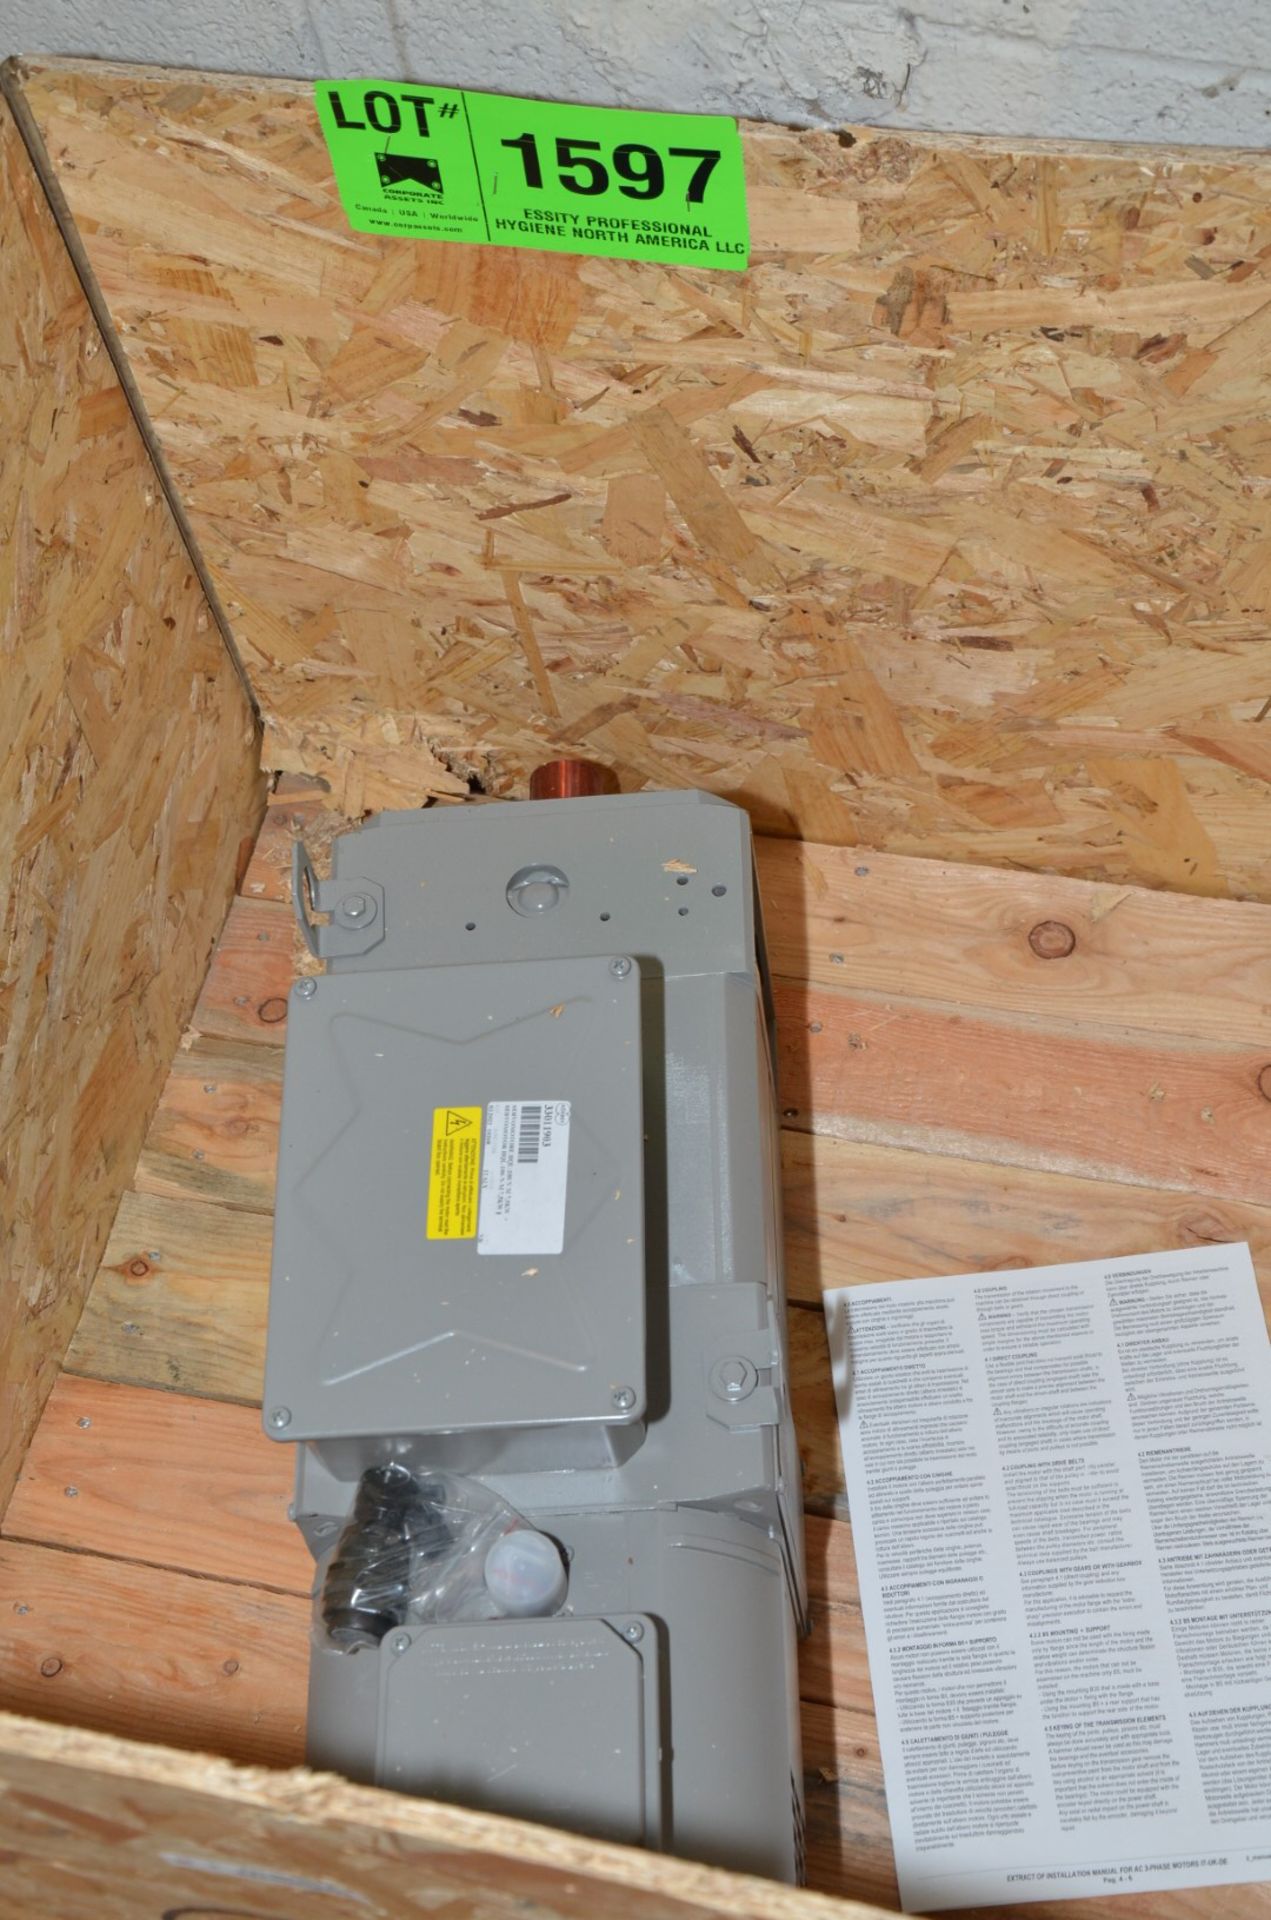 KORBER ELECTRIC SERVO MOTOR WITH 7.5 KW [RIGGING FEE FOR LOT #1597 - $25 USD PLUS APPLICABLE TAXES]